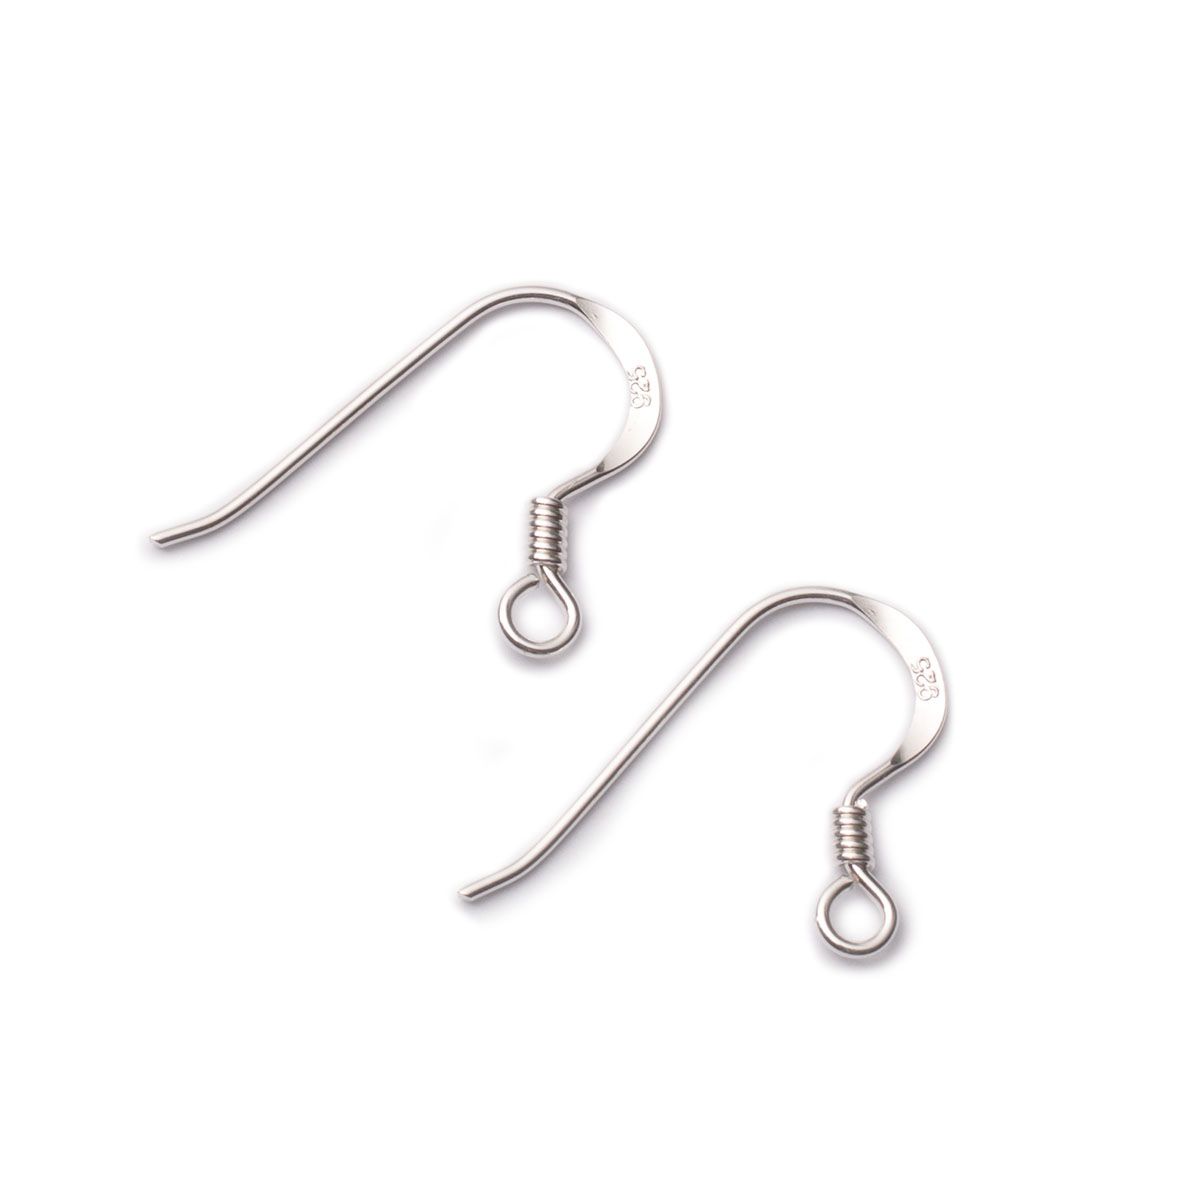 Sterling Silver Shepherds Crook Earwire with Spring (Pair)